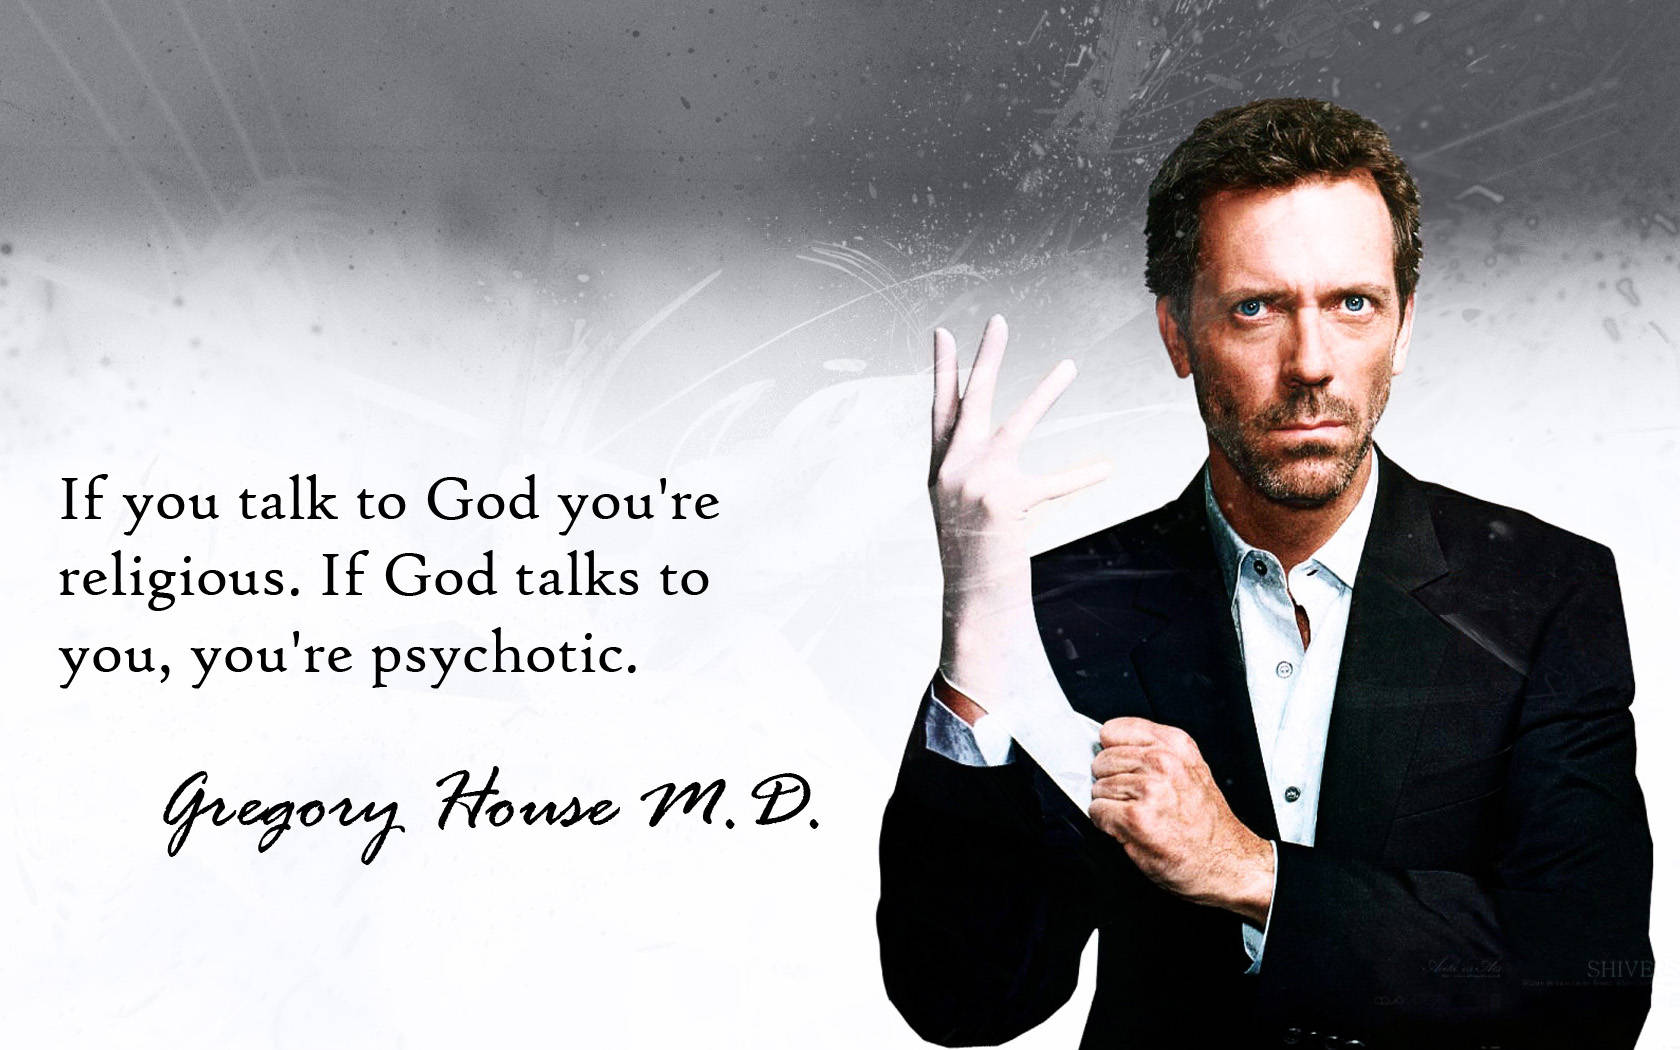 Gregory House M.D Hugh Laurie Quotes Wallpaper